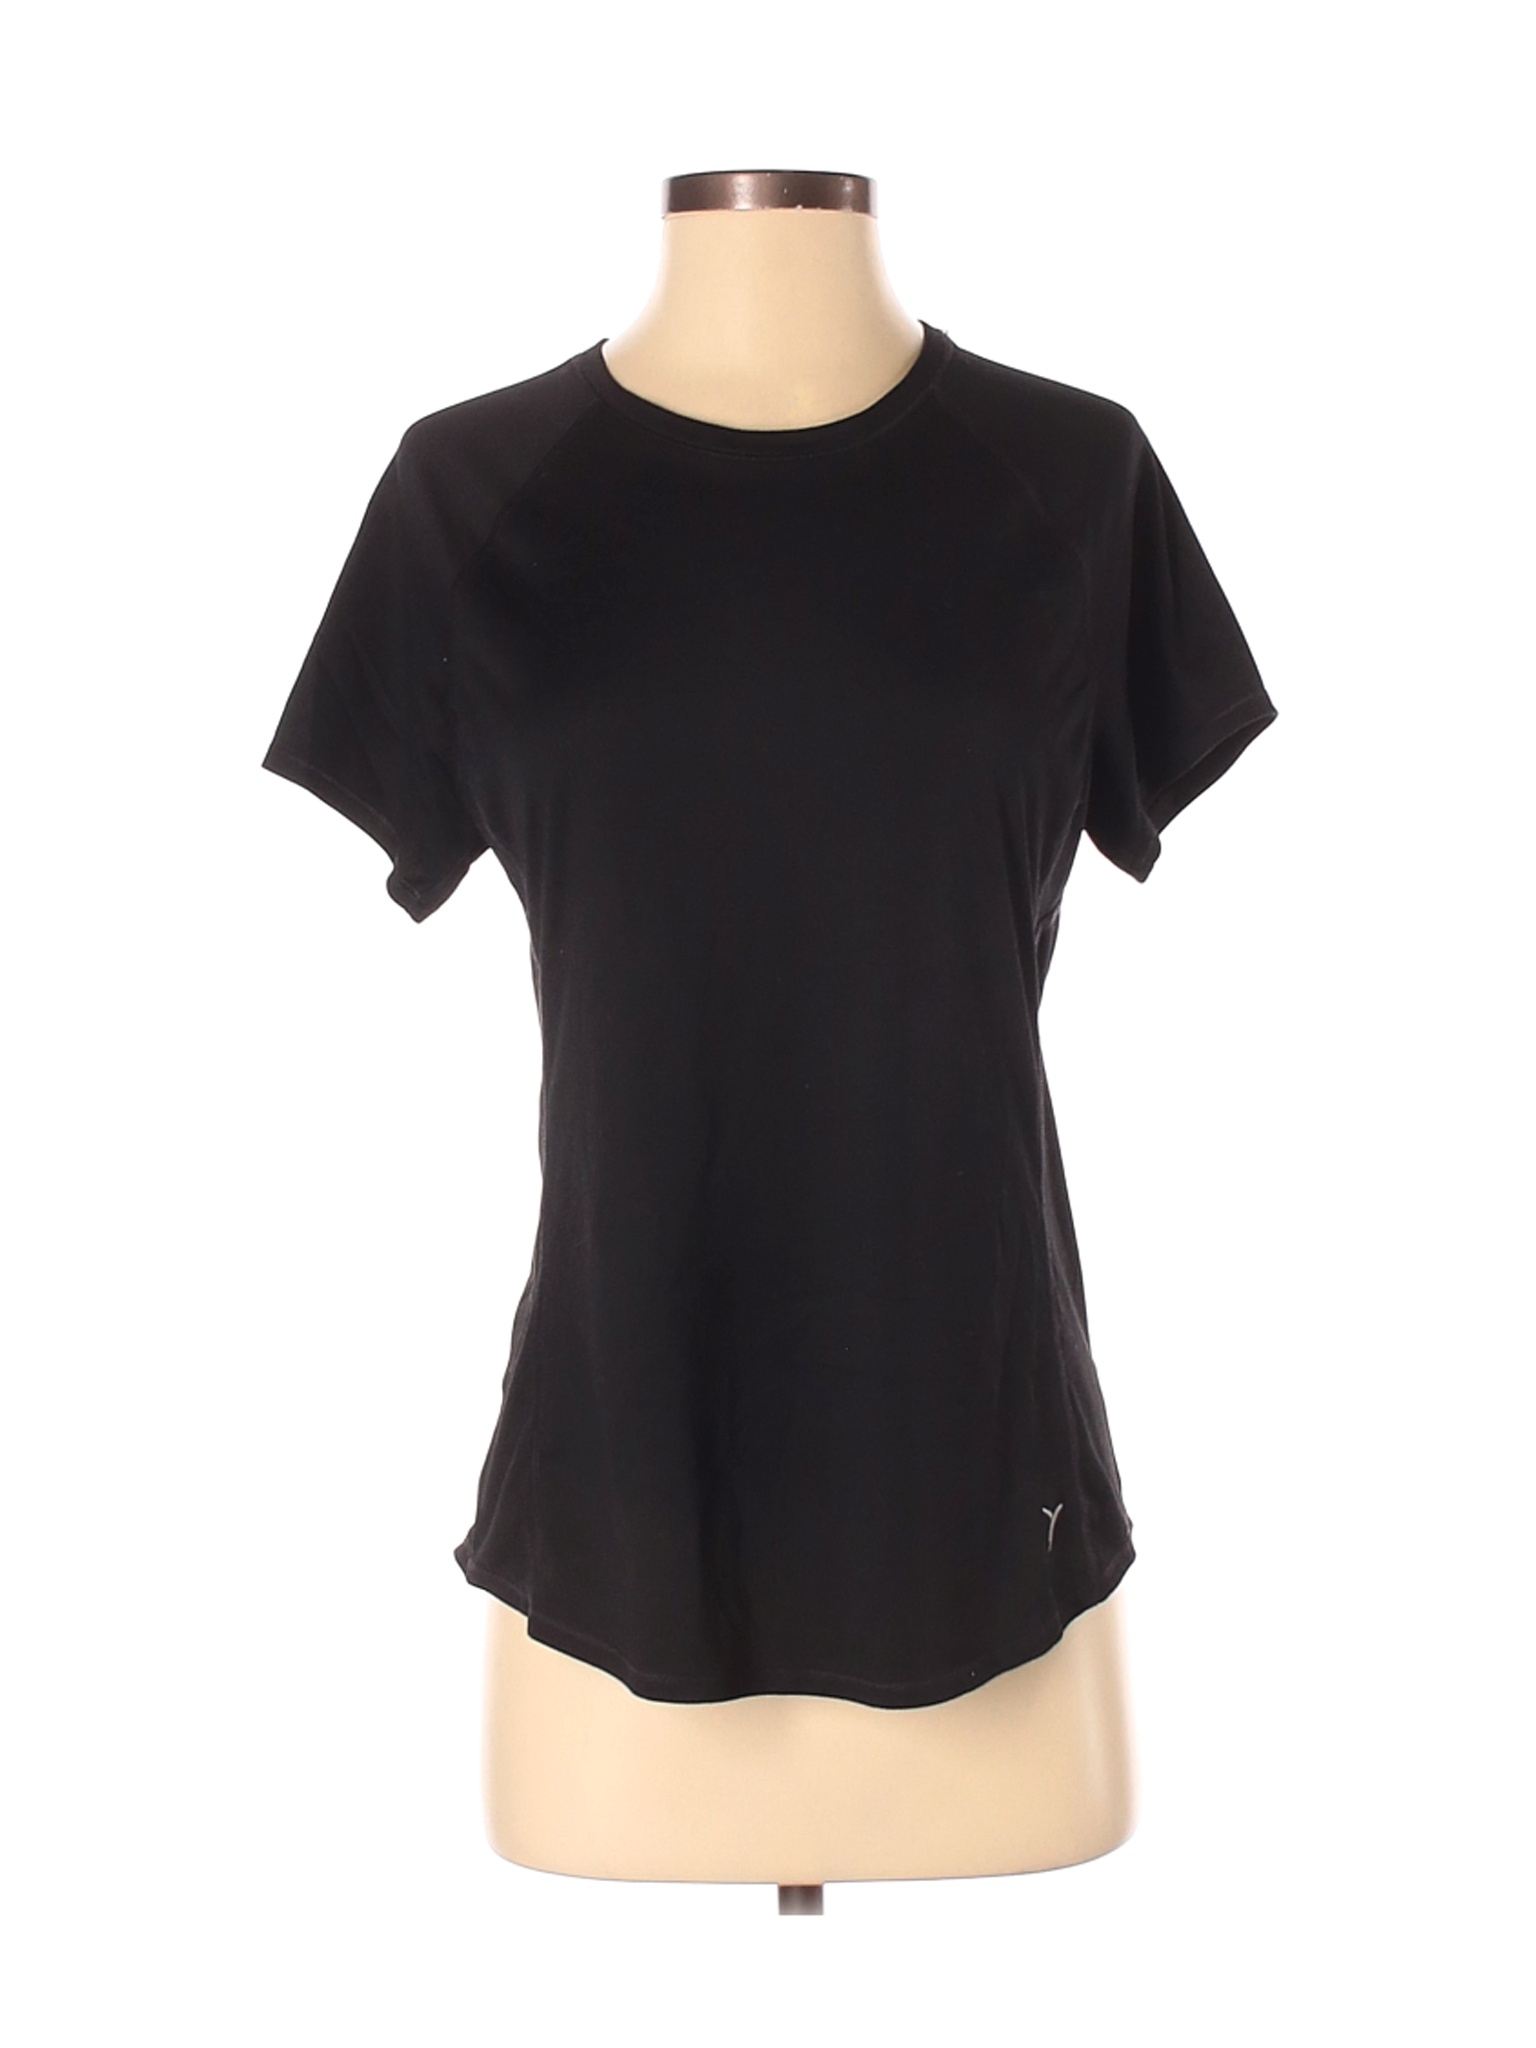 Active by Old Navy Women Black Active T-Shirt M | eBay